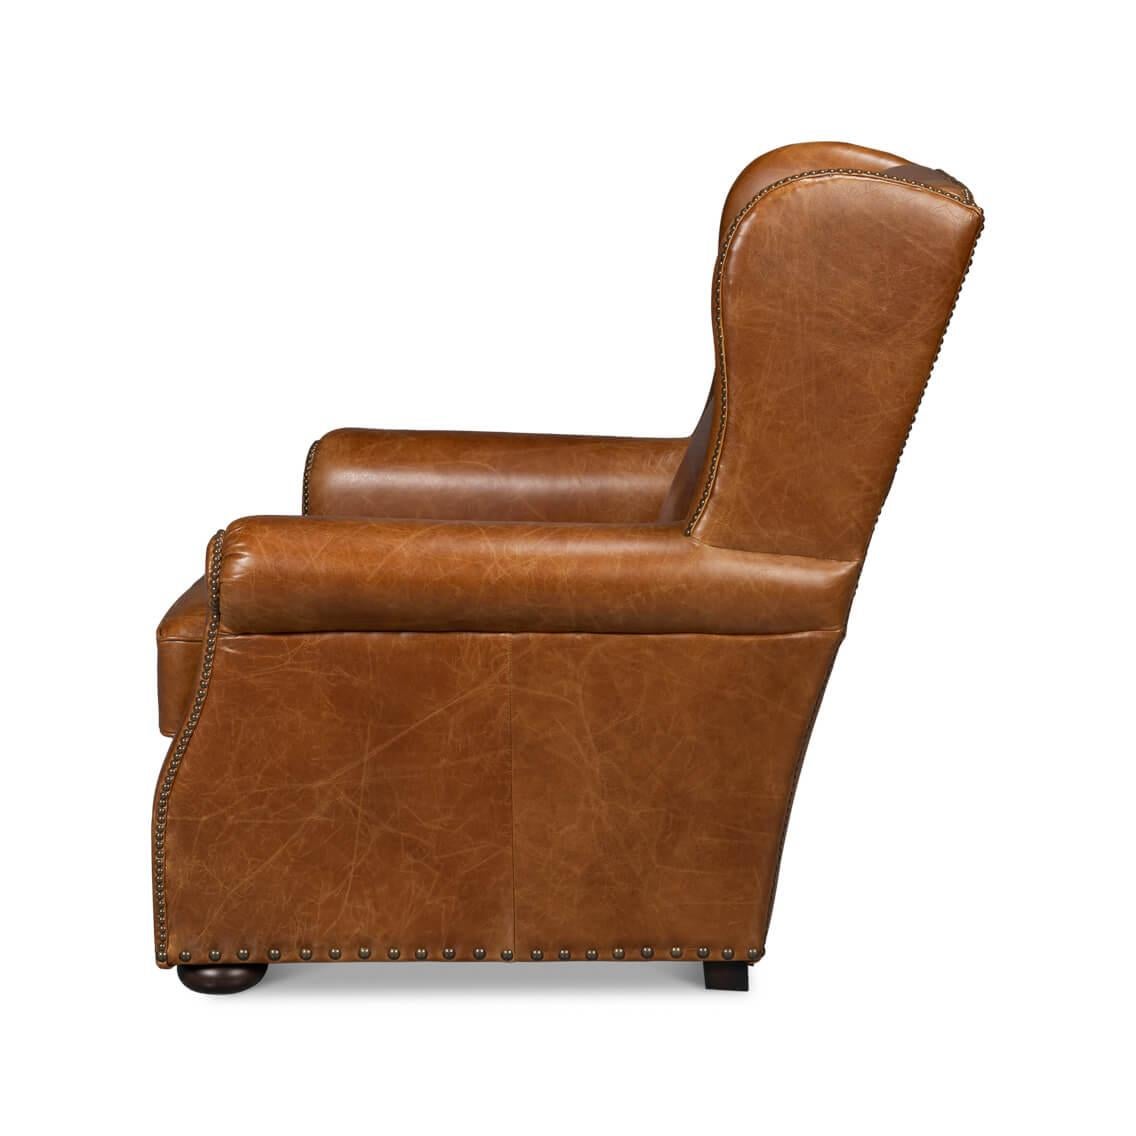 American Classical Cuba Brown Classic Leather Armchair For Sale